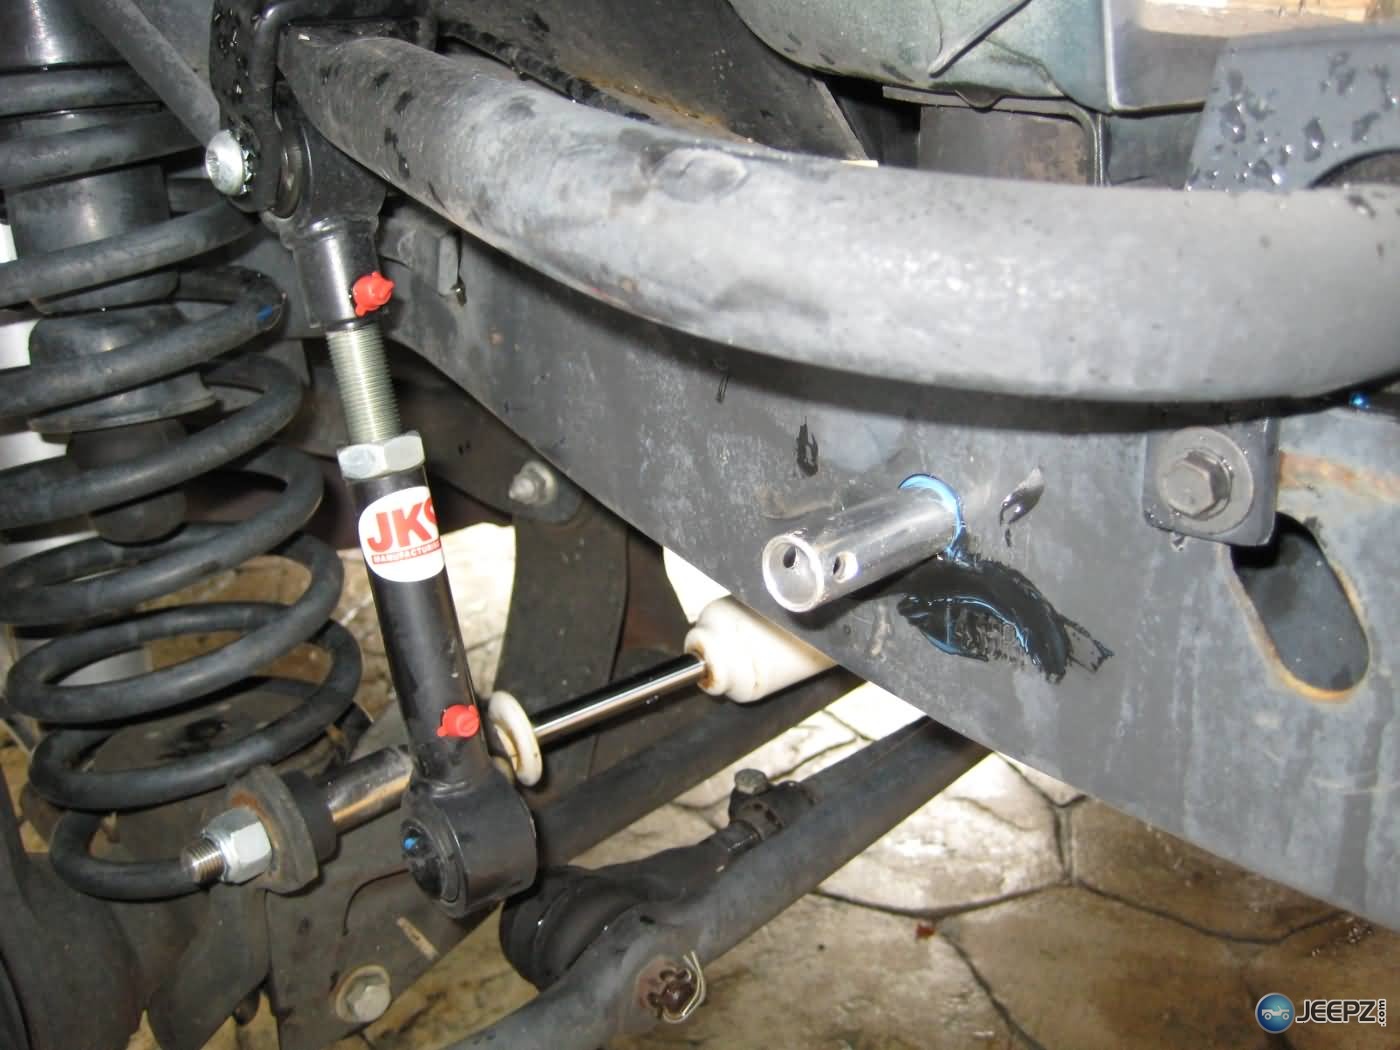 r-jeep-wrangler-bolted-up-jeep-sway-bar-disconnect.jpg